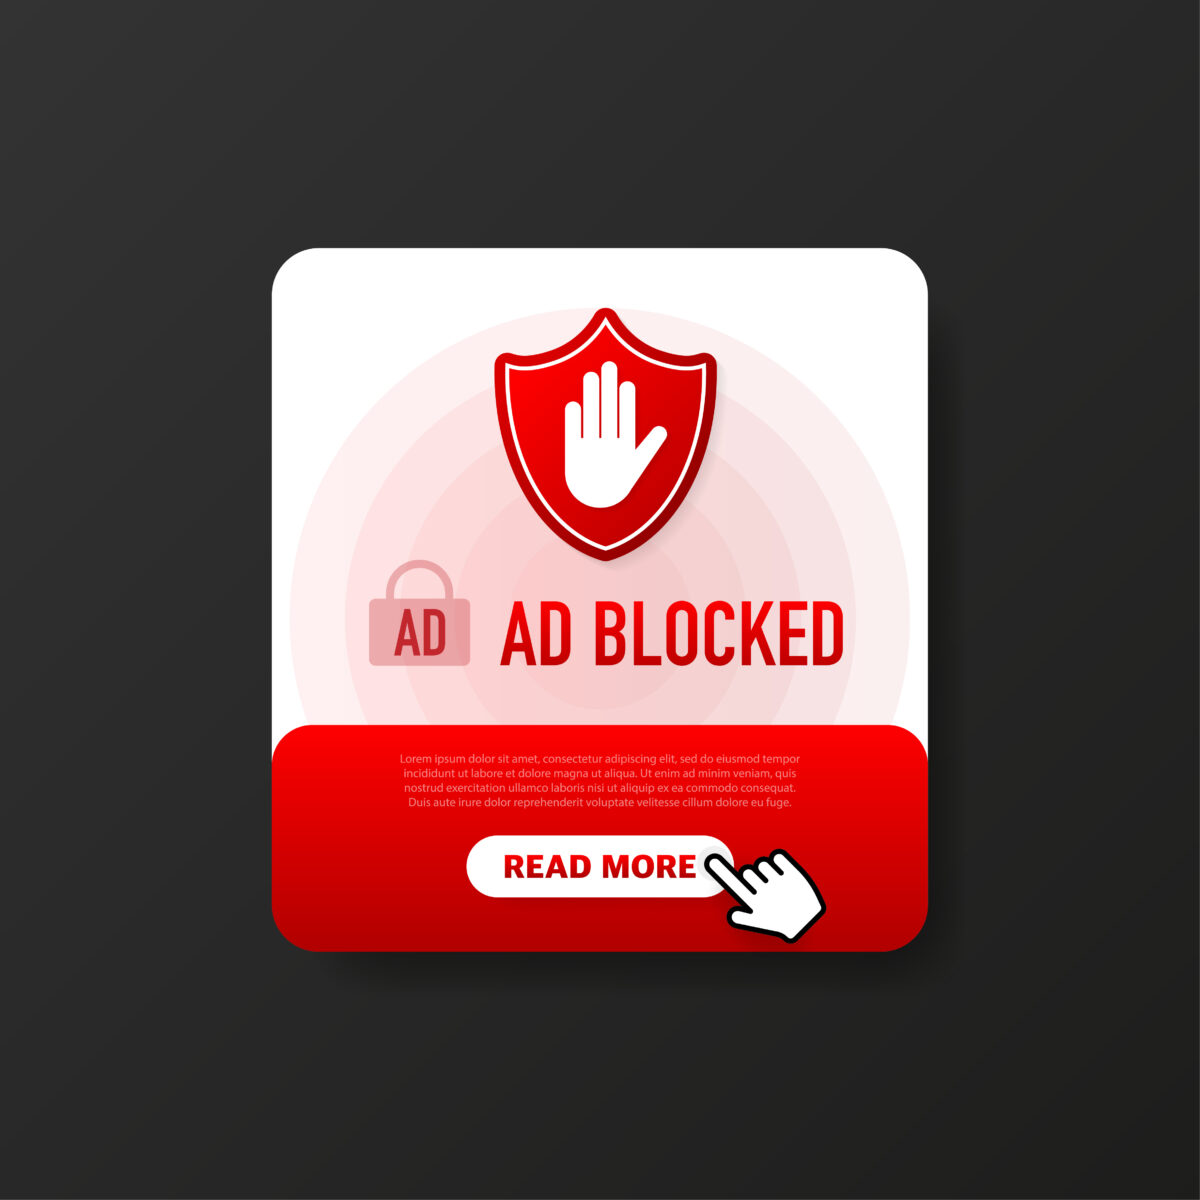 7 things publishers should know about Ad blockers?